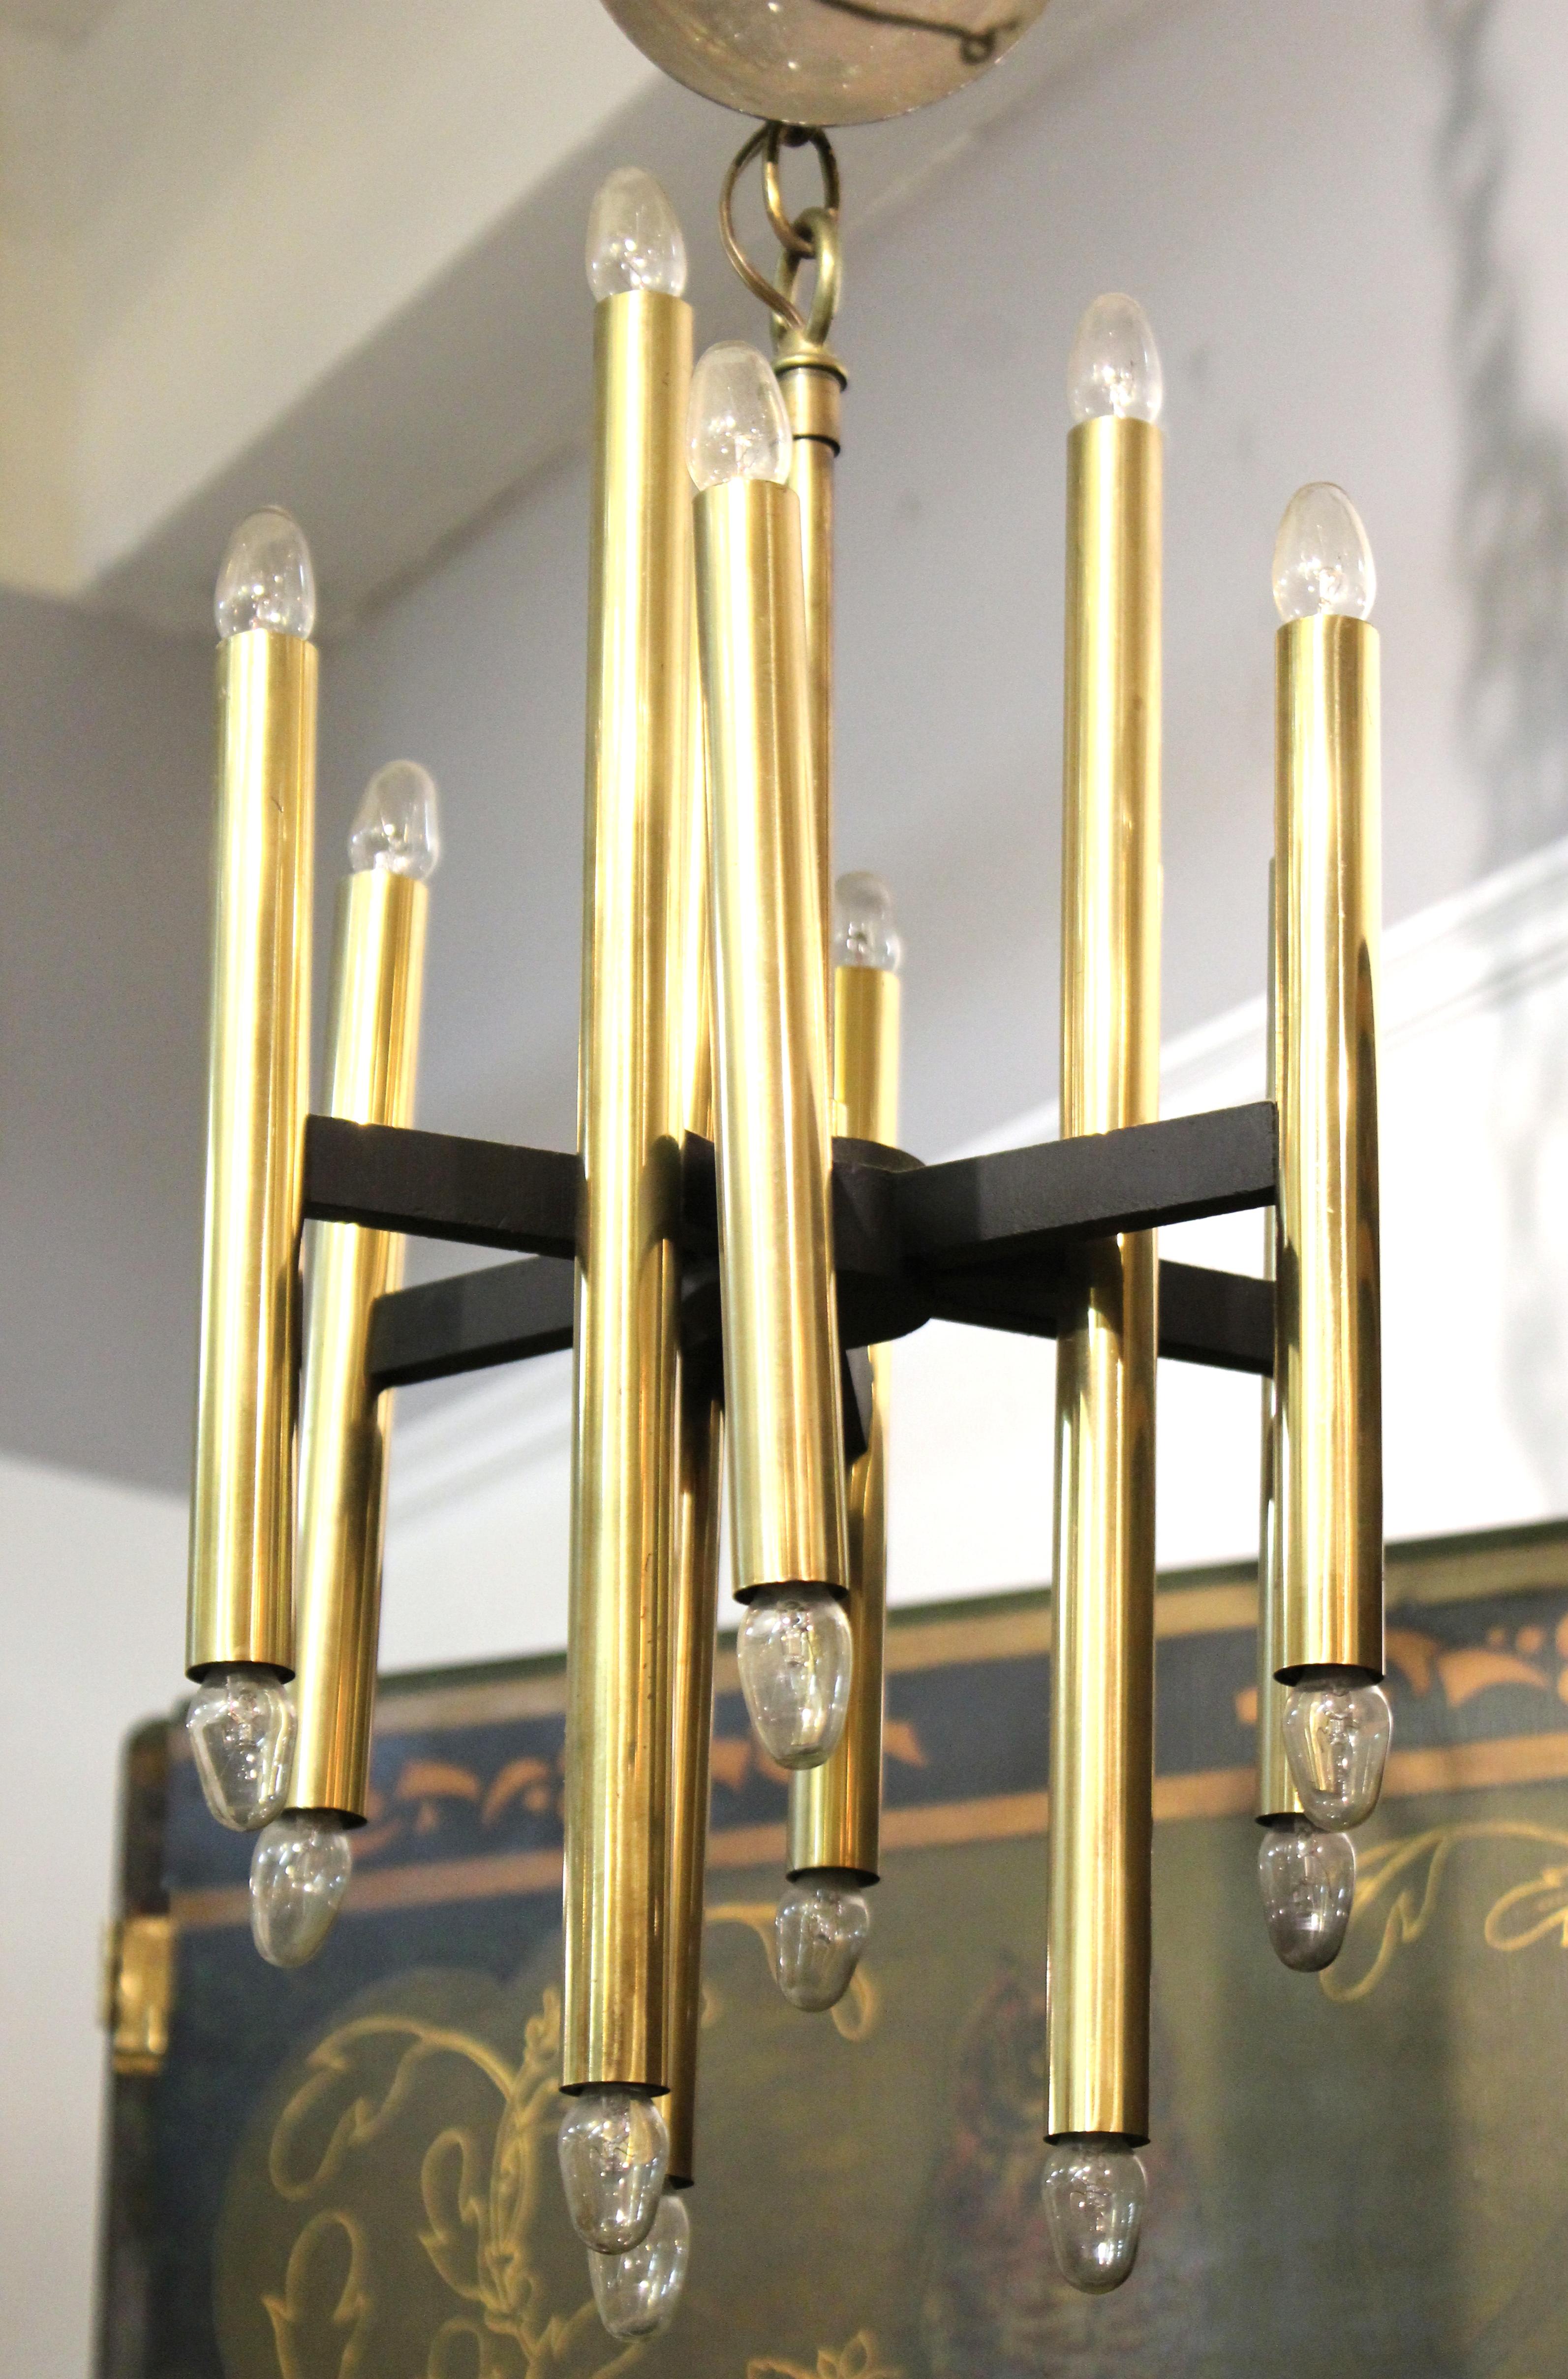 Italian Modern ceiling pendant chandelier in metal with brass tubes holding the light sources on both ends, designed by Sciolari in Italy during the 1970's. The piece is in great vintage condition with some minor are-appropriate wear to the metal